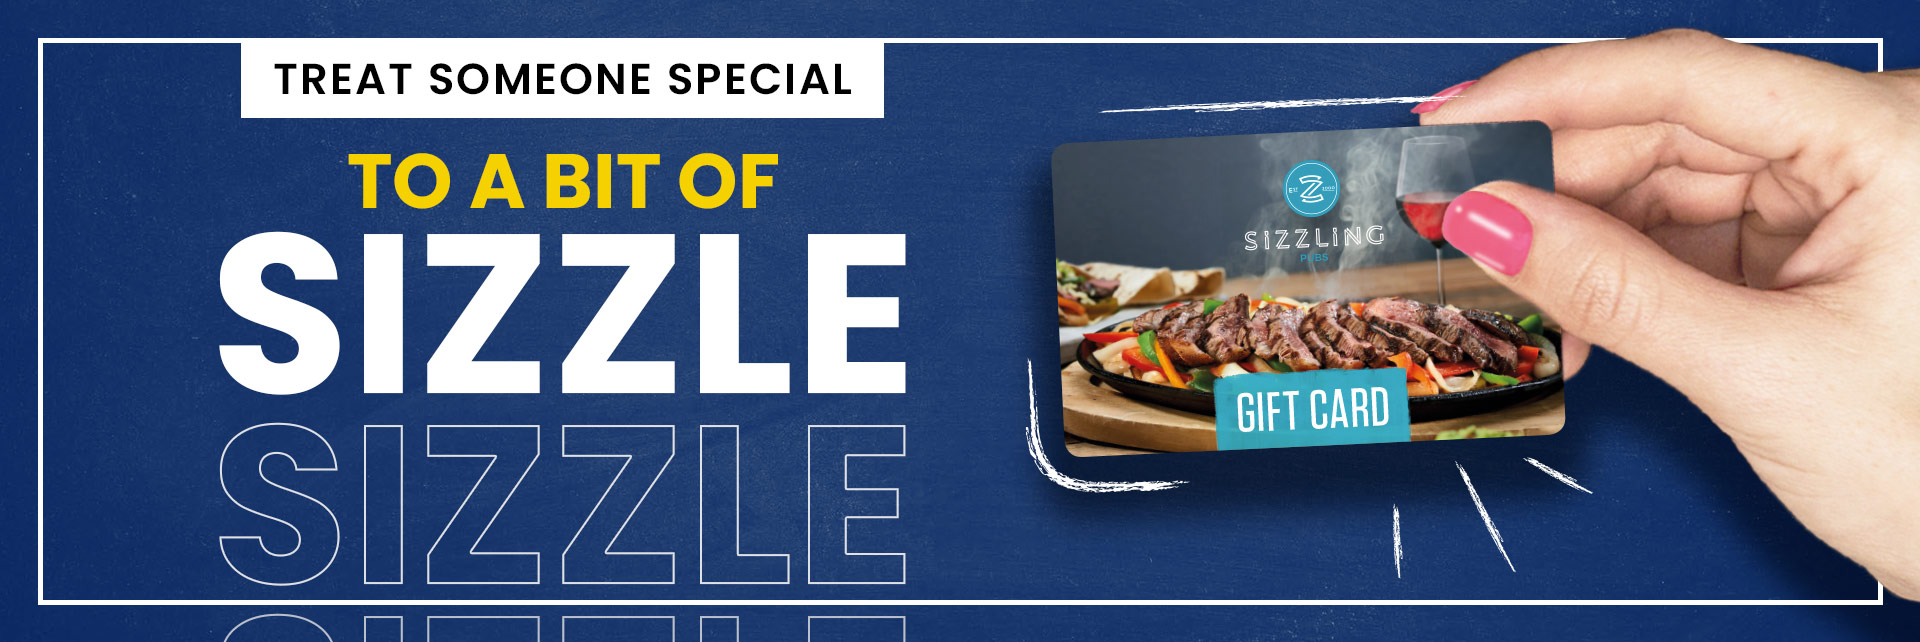 Sizzling Pubs Gift Card at The Wallace in Coventry